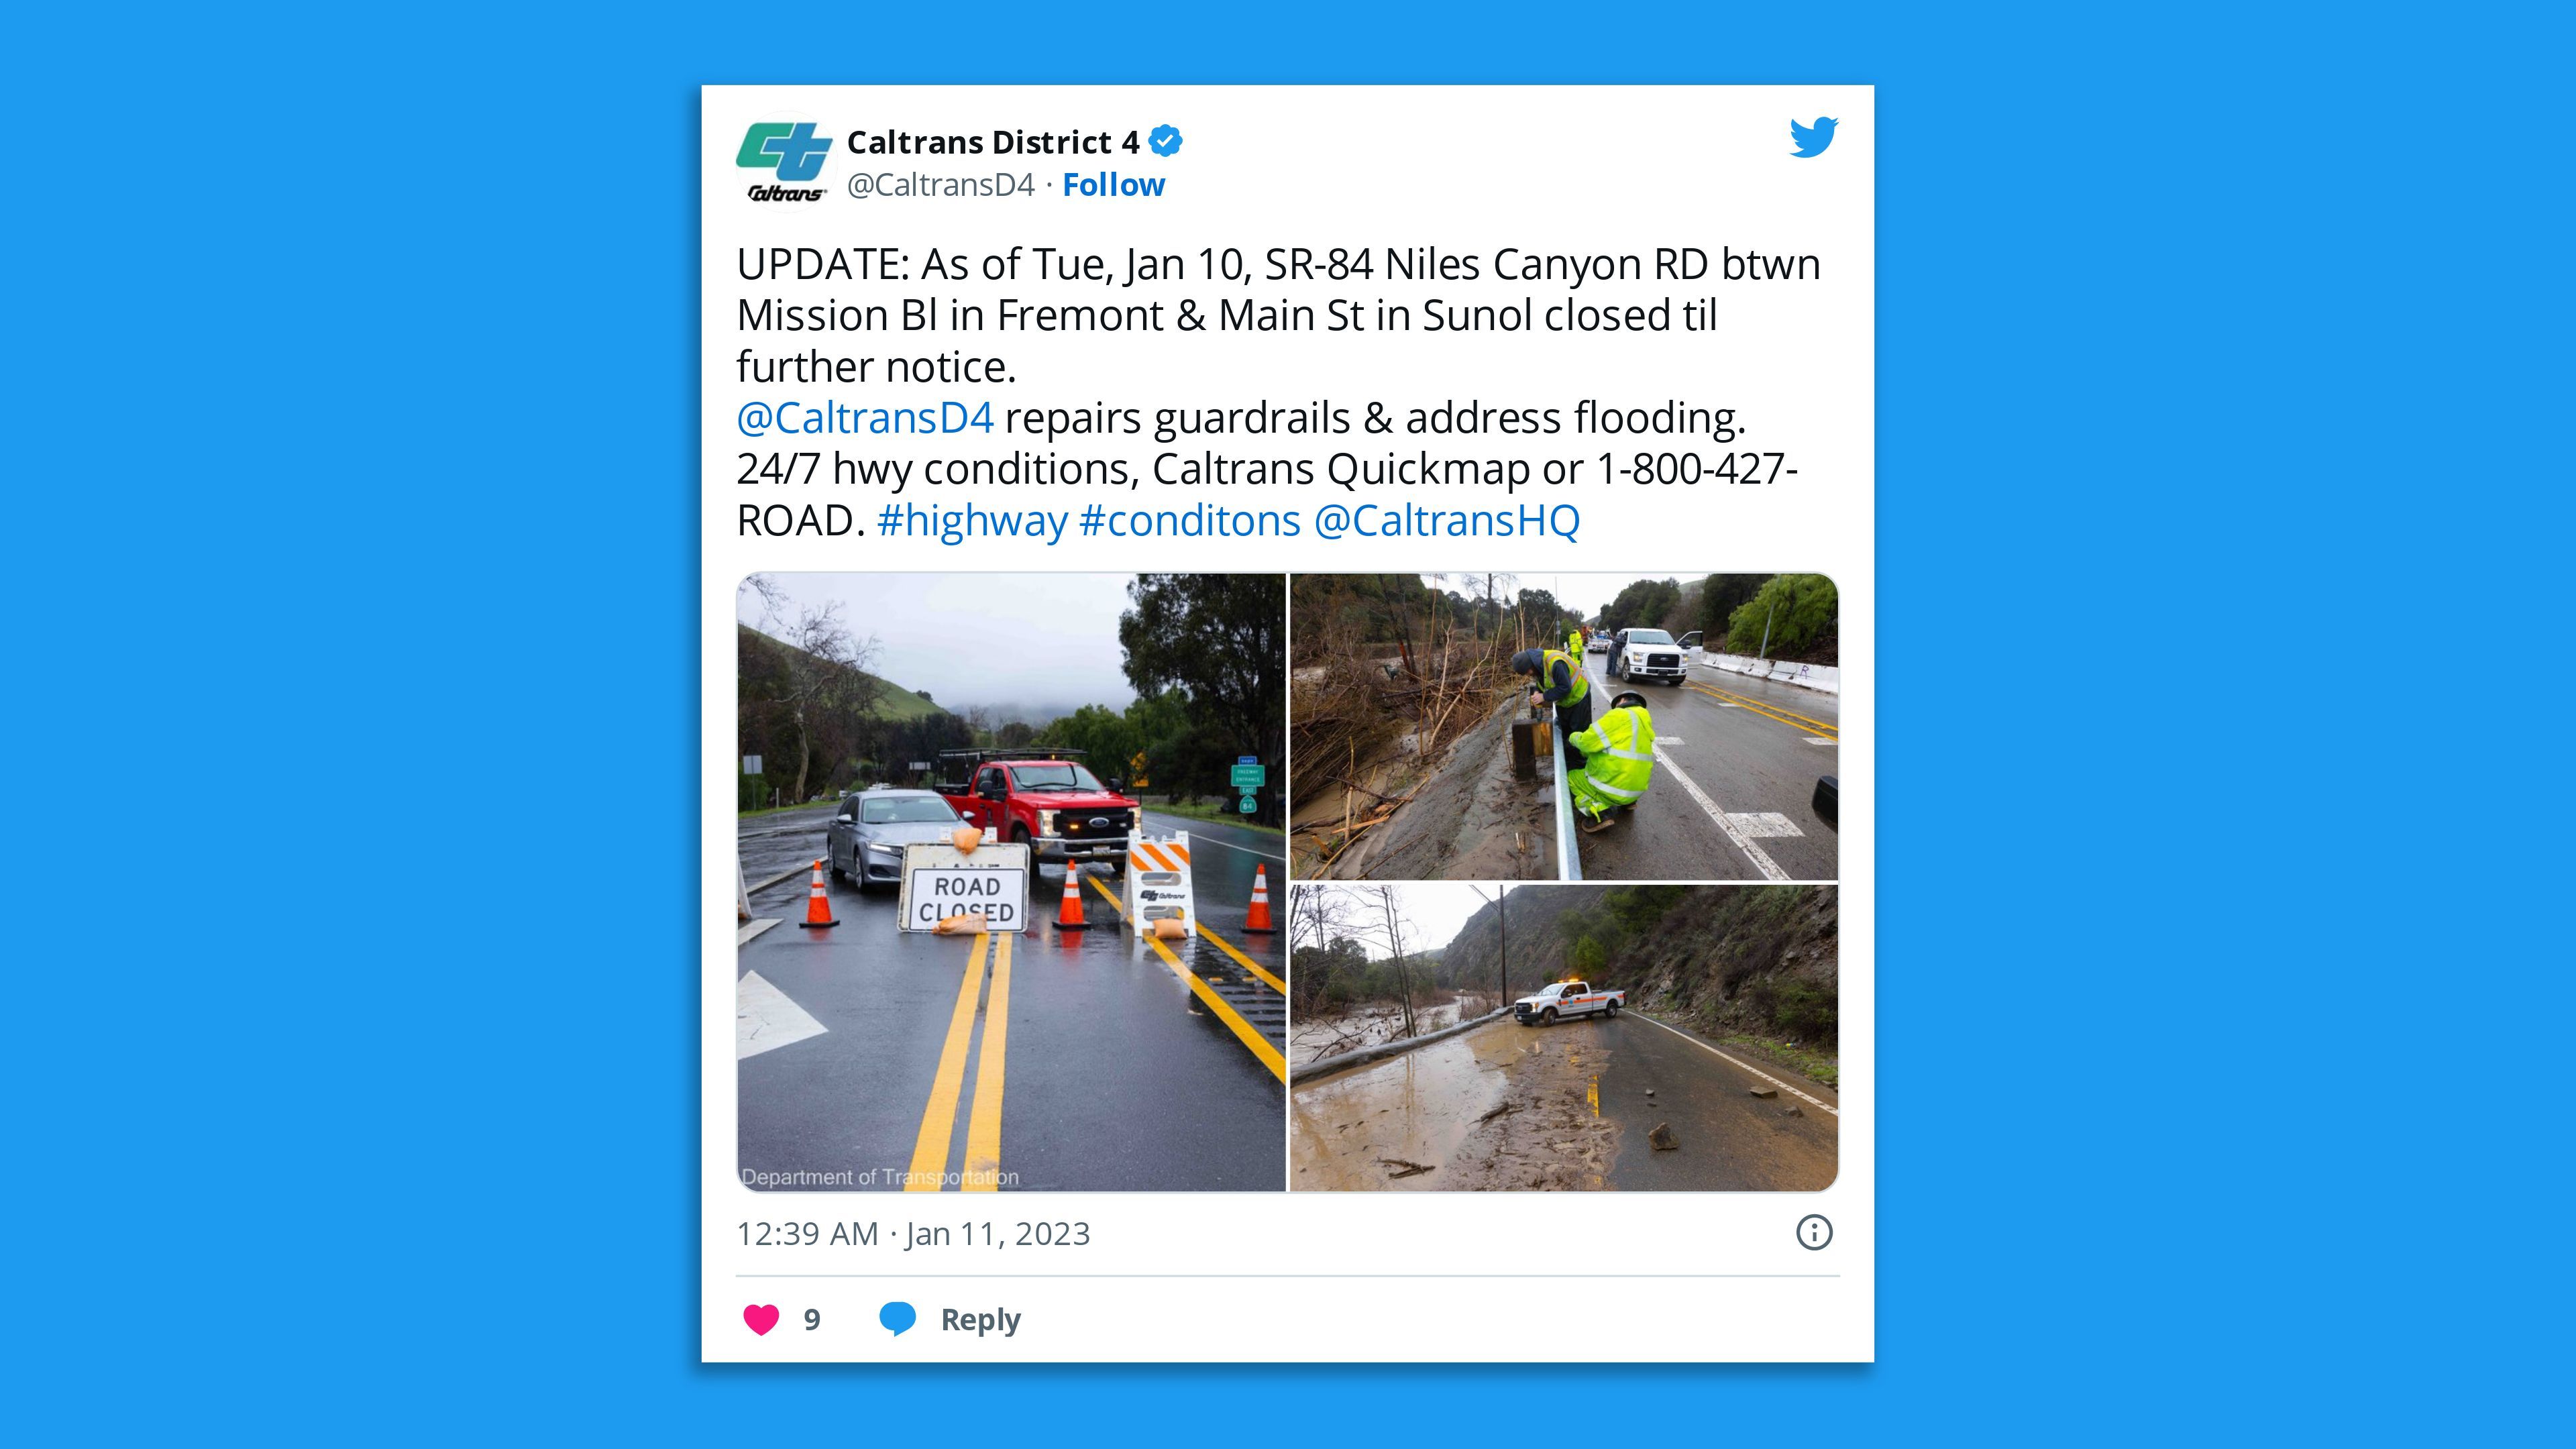 A screenshot of a California Department of Transportation photo tweet showing emergency responses to landslides on roads across the state.